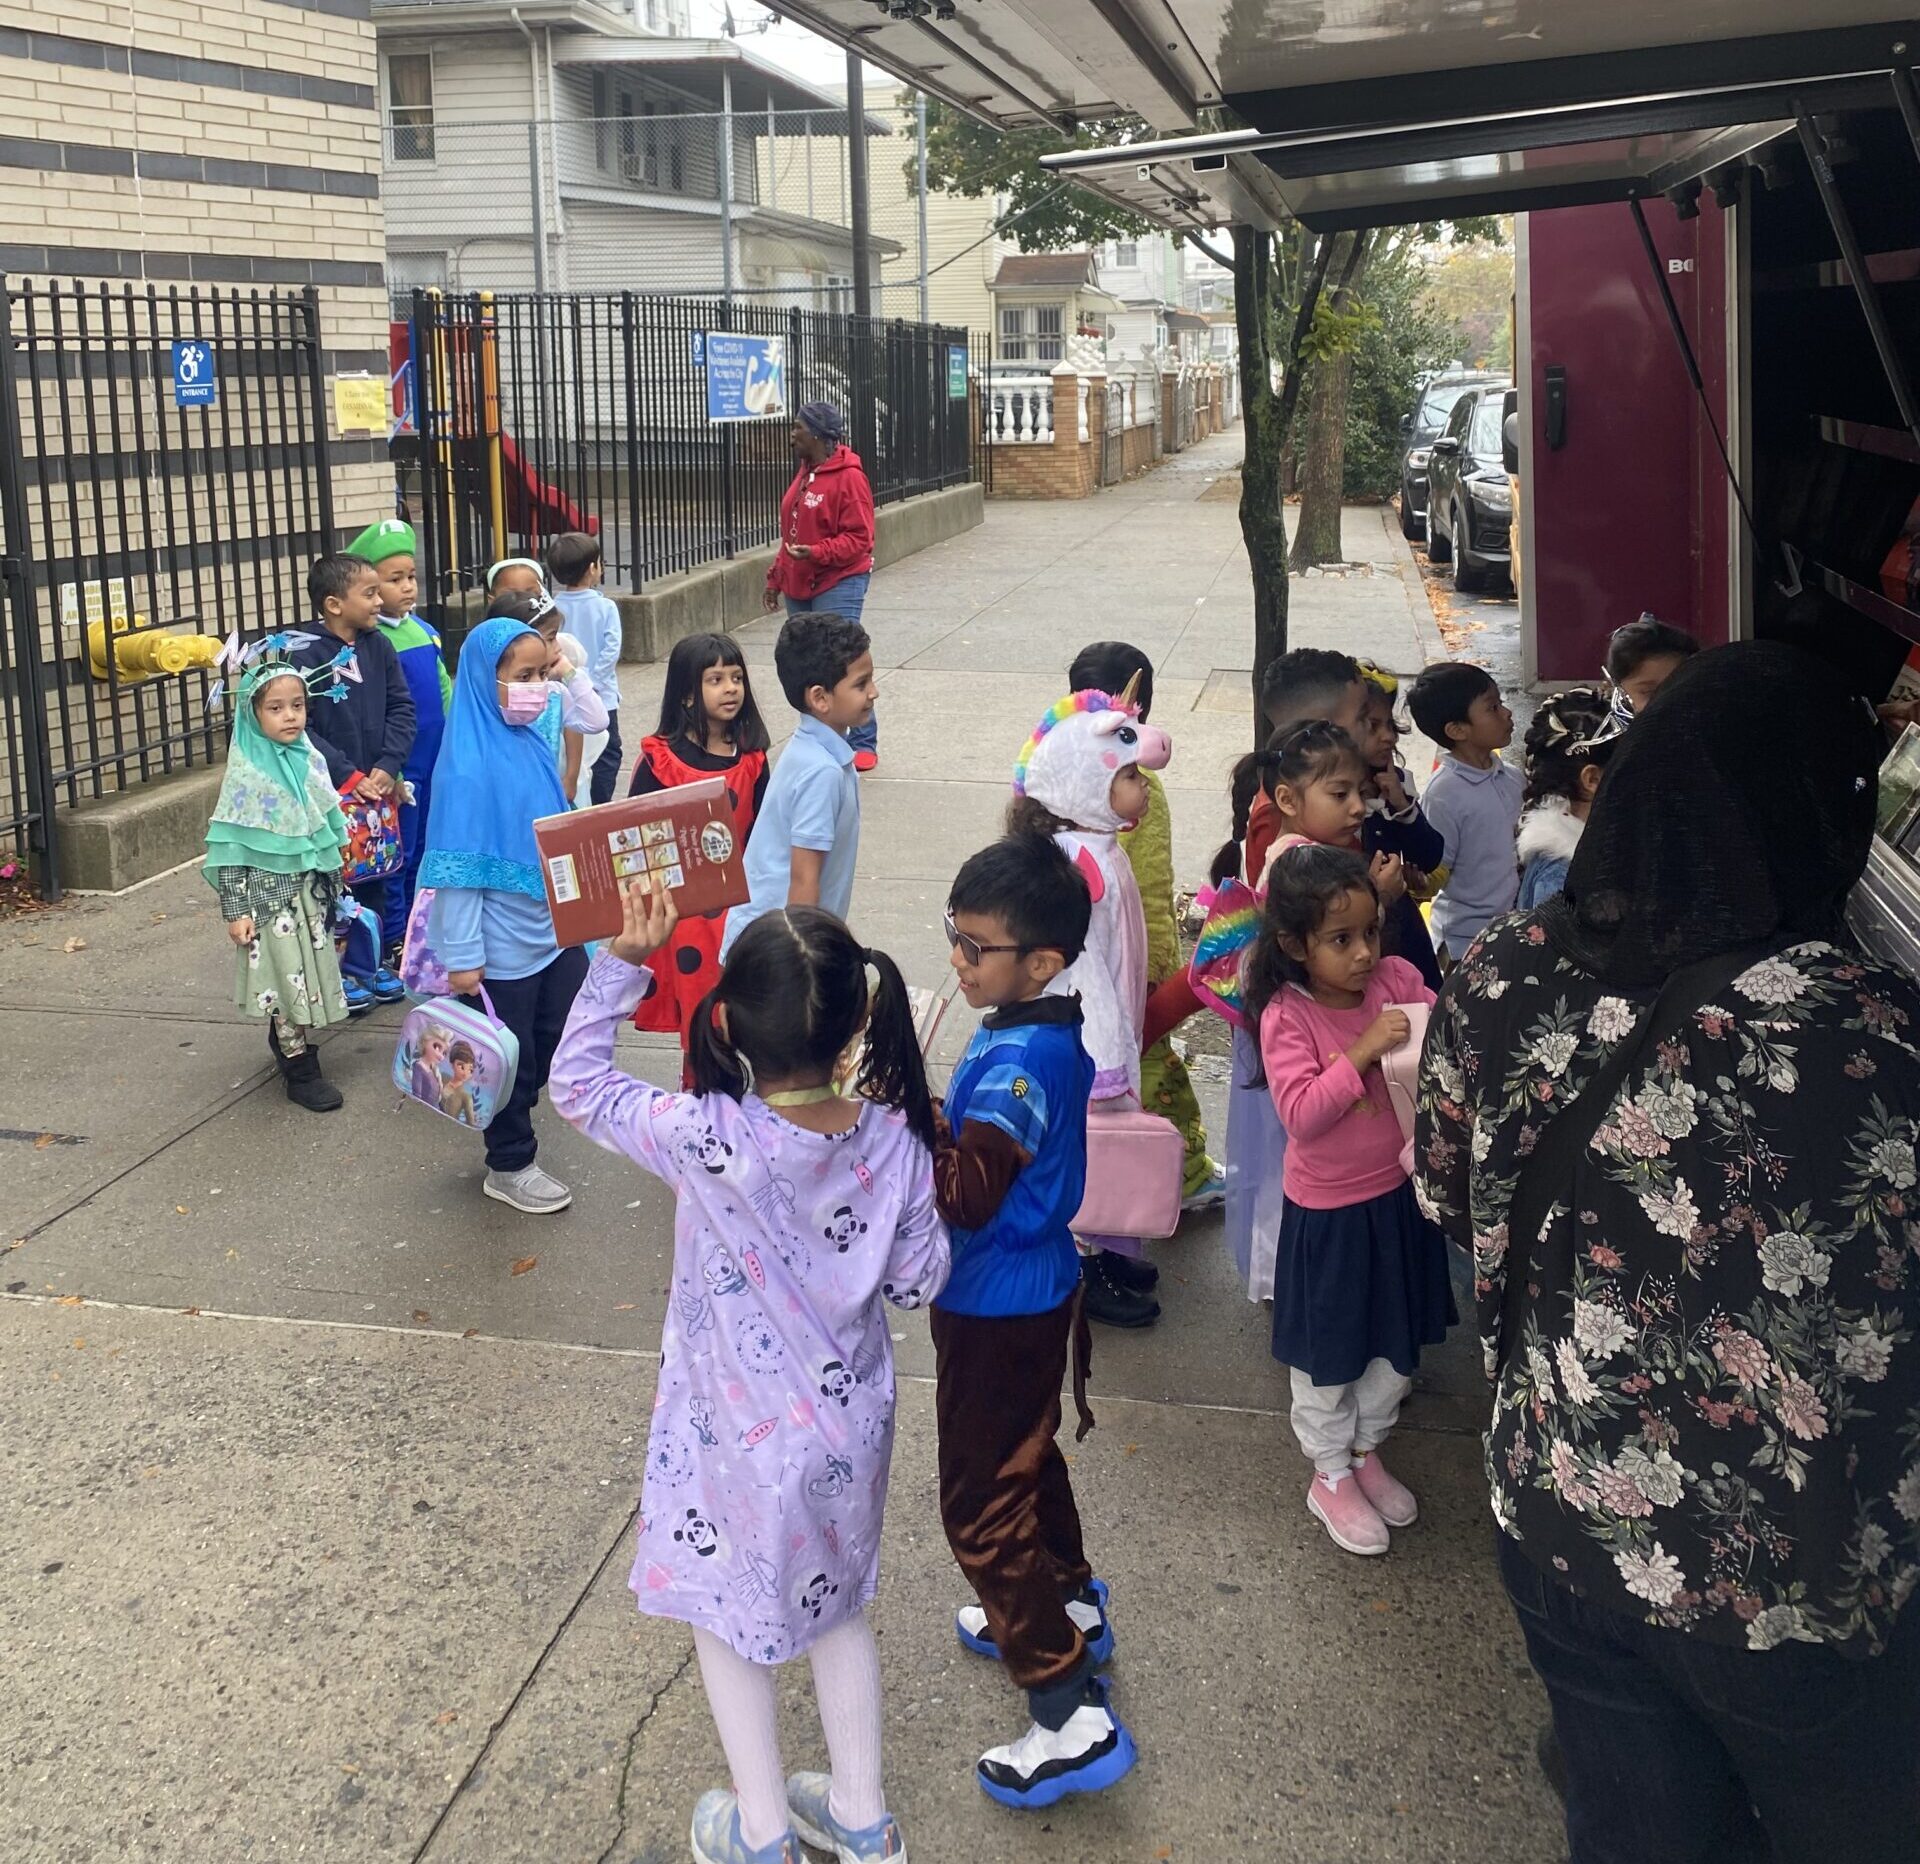 A crowd of young children gathers around House of SpeakEasy's Bookmobile